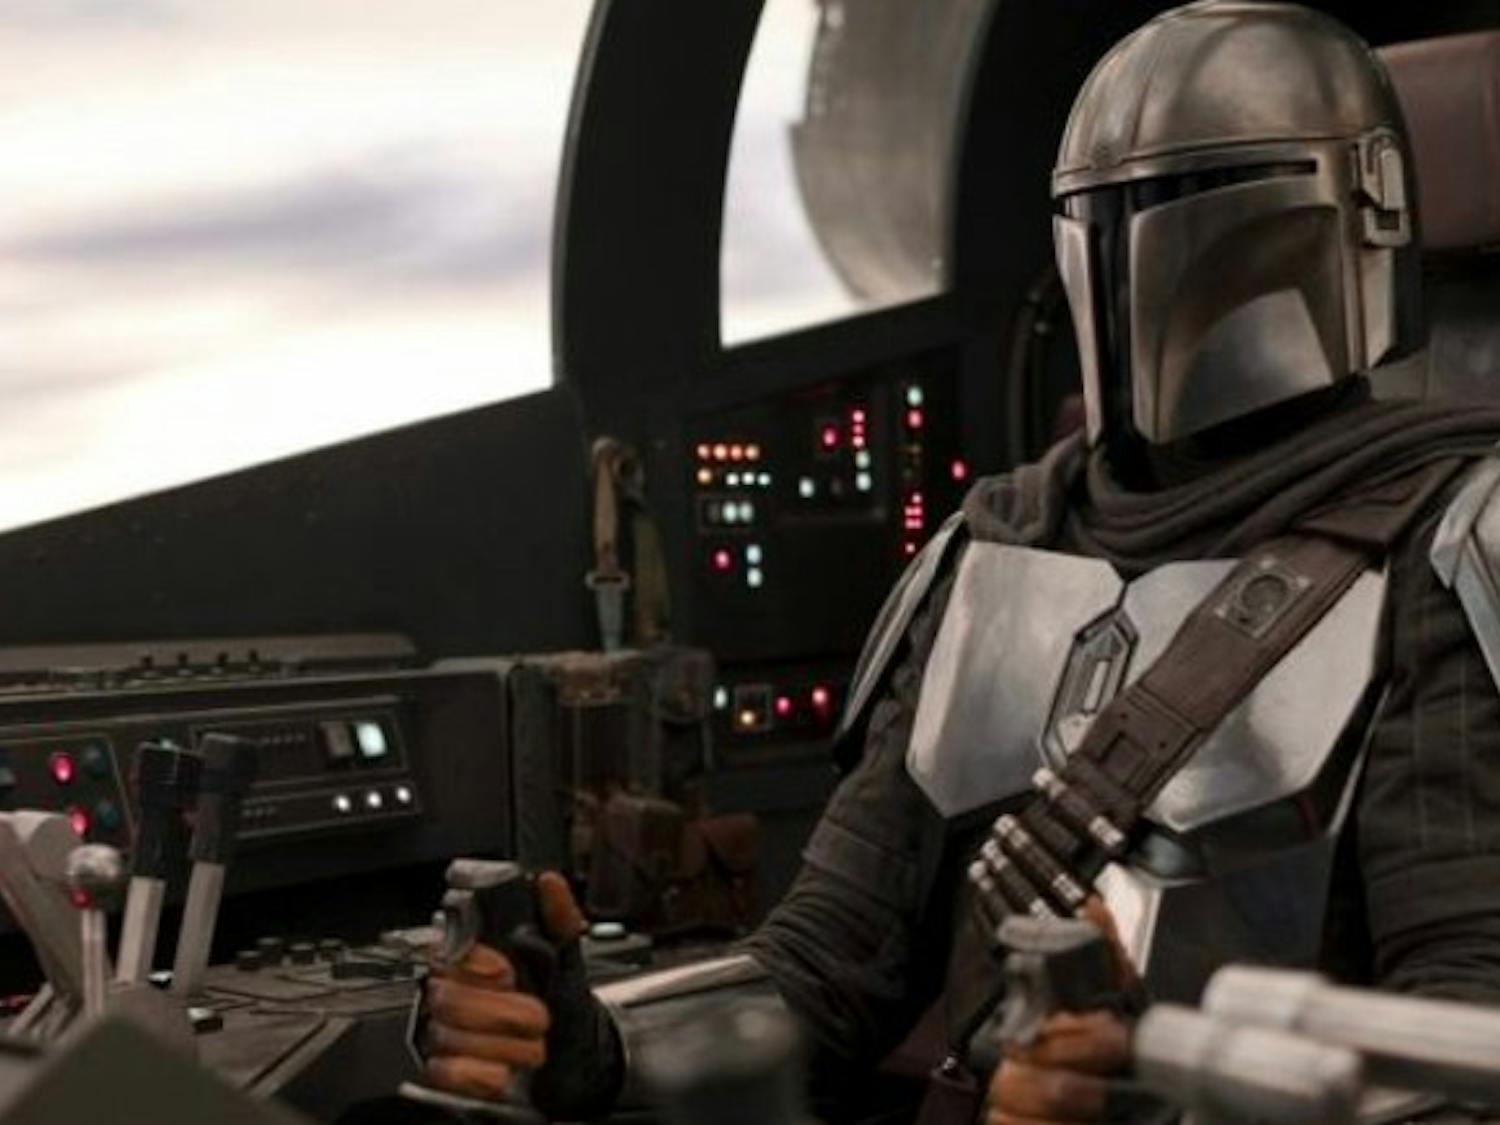 The Mandalorian, played by Pedro Pascal, pursues a mysterious cargo